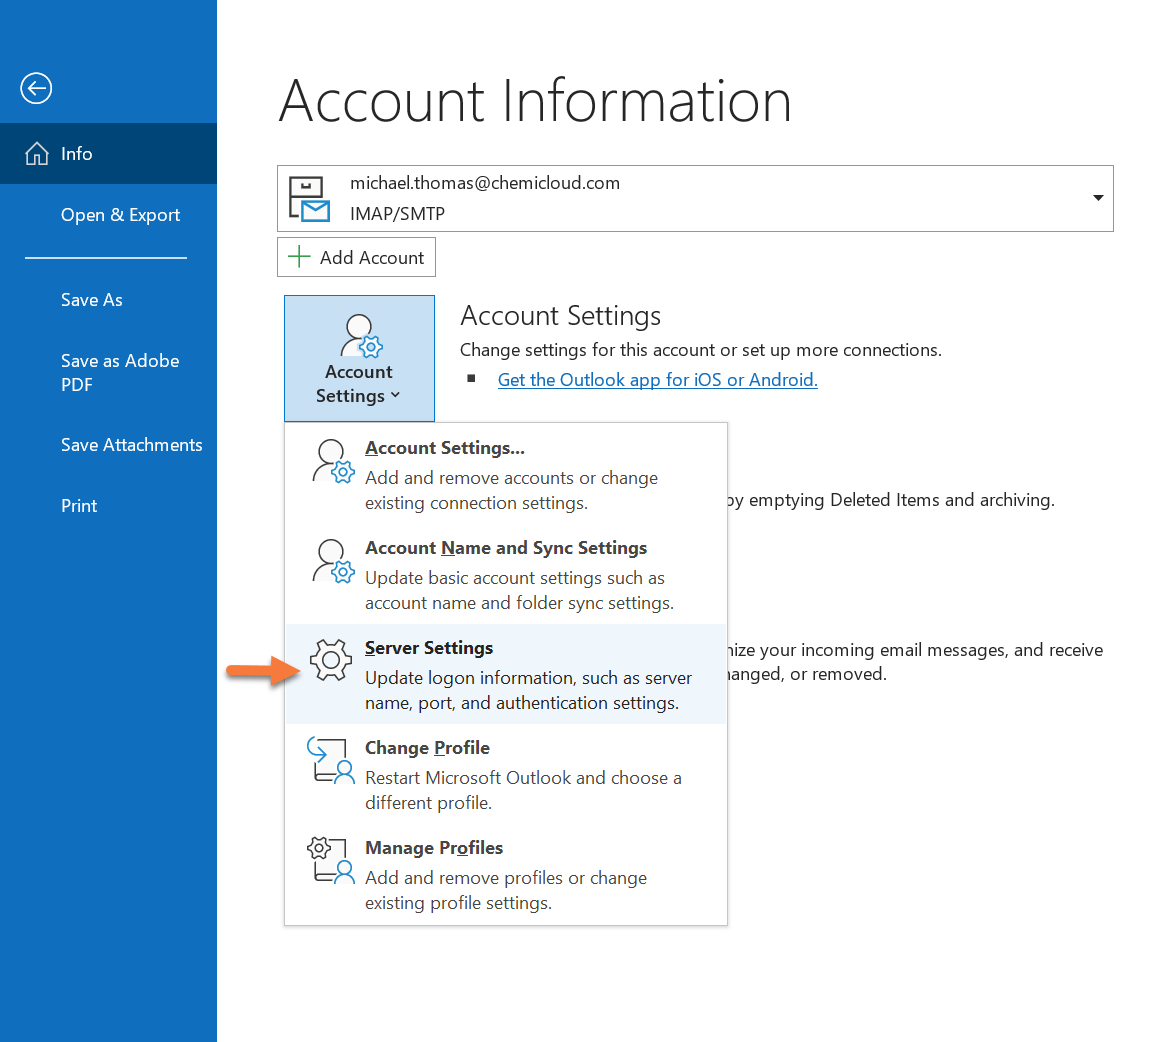 How to Update Email Account Settings in Microsoft Outlook 365